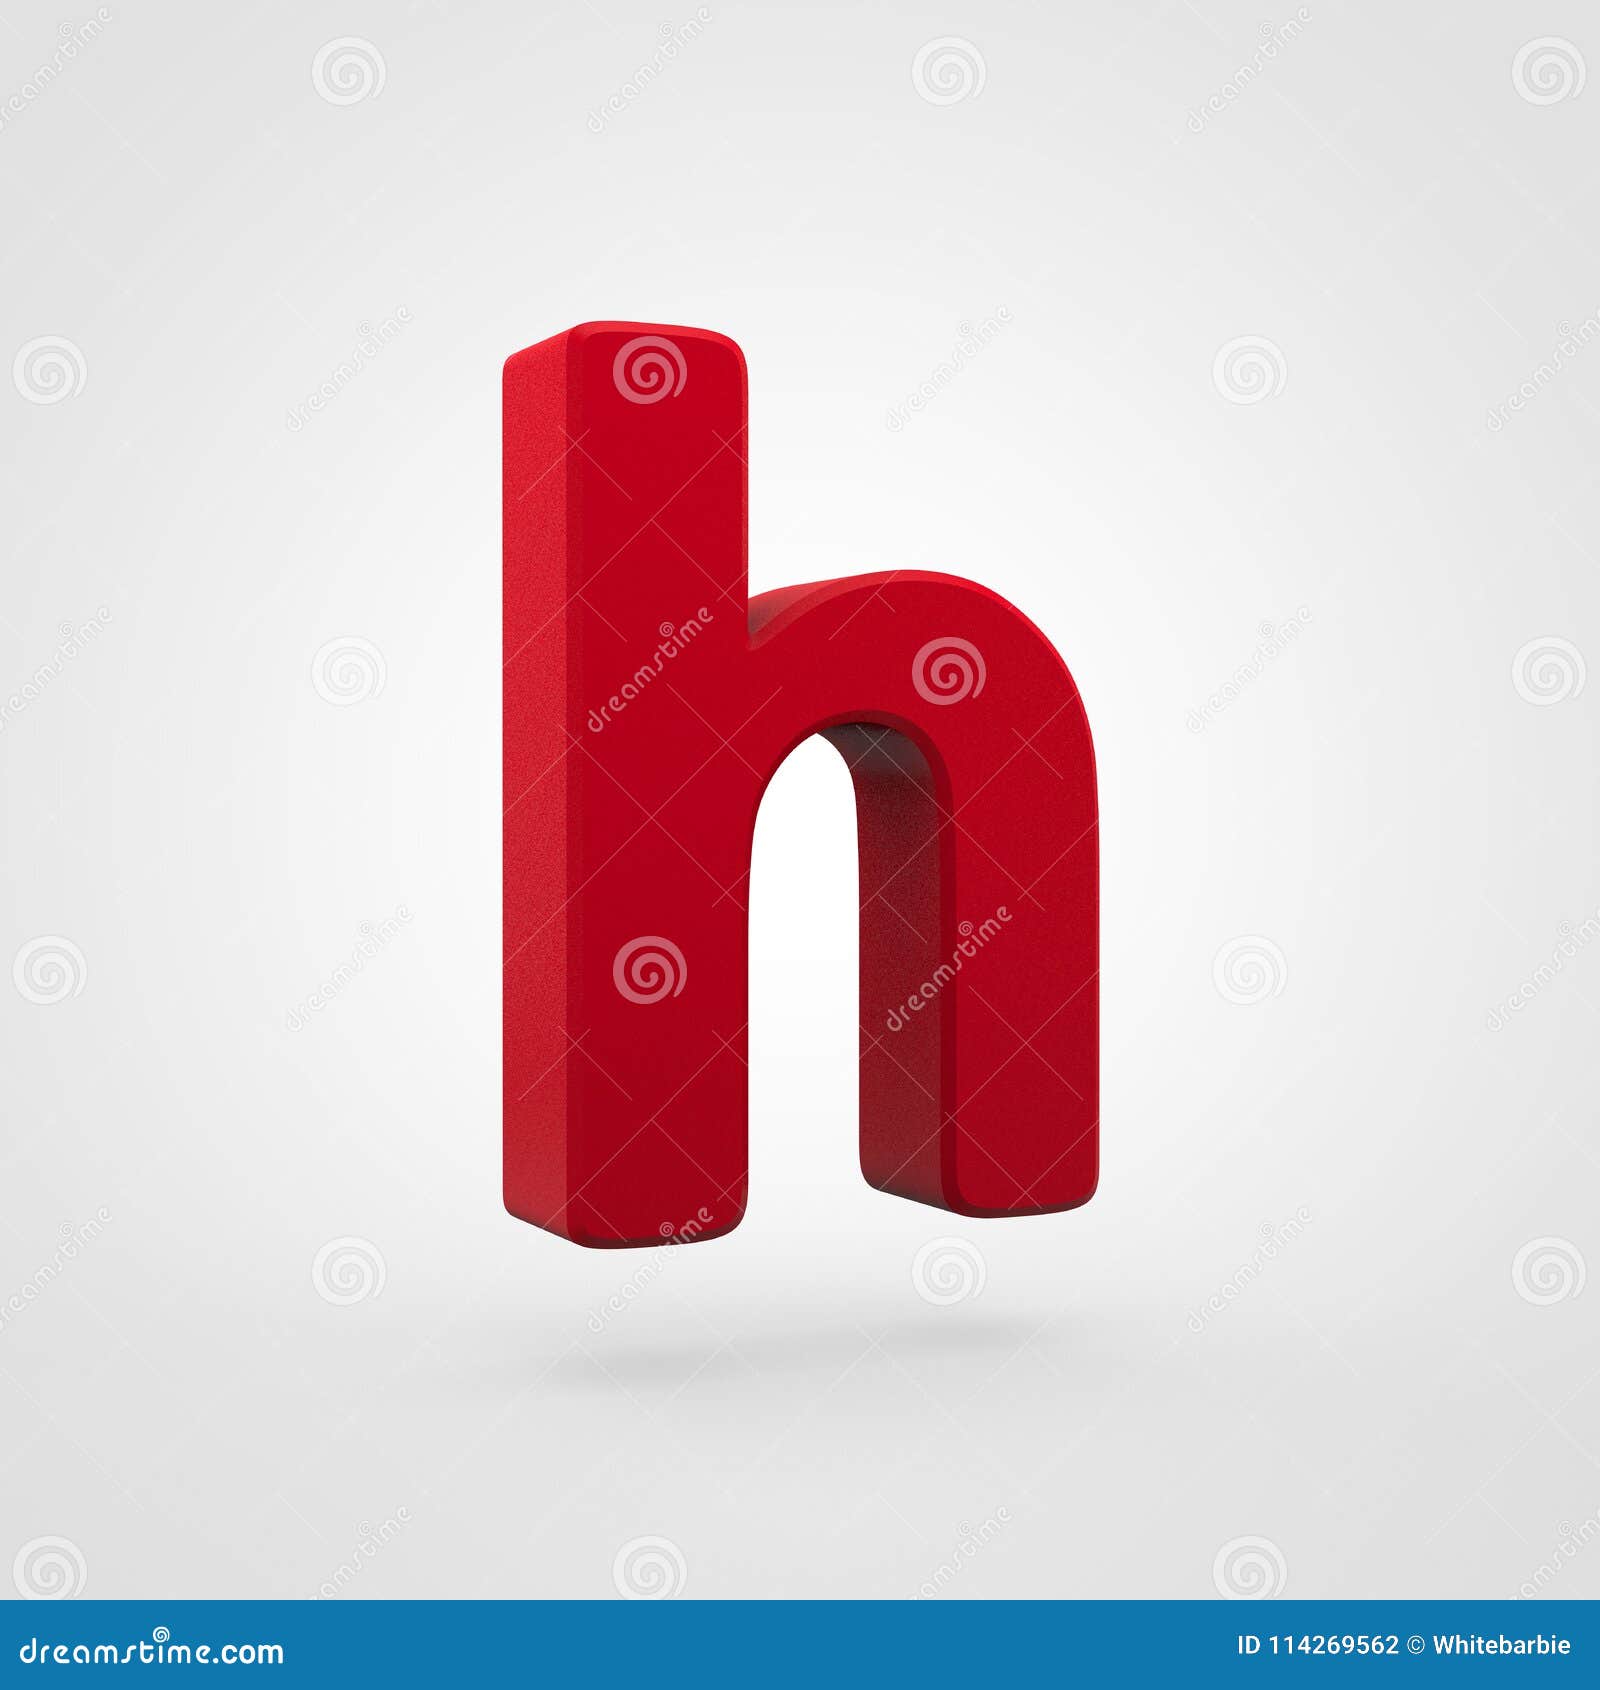 Plastic Red Letter H Lowercase Isolated On White Background. Stock ...